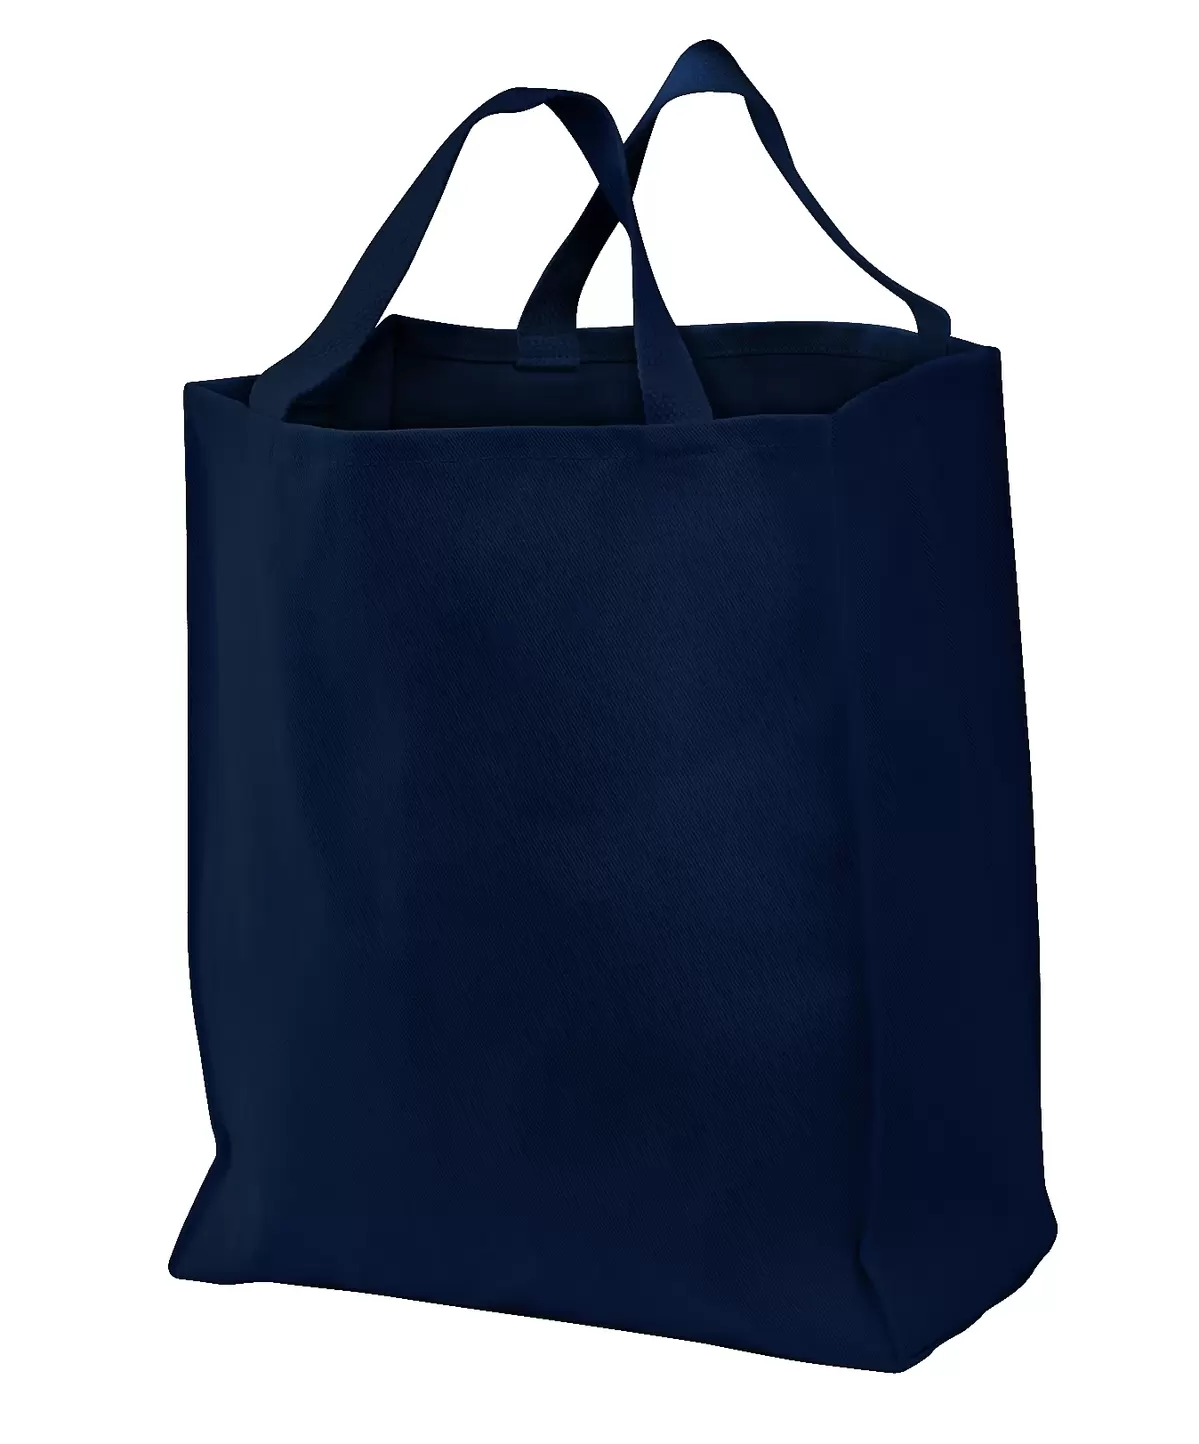 Port Authority B100 Grocery Tote - blankstyle.com